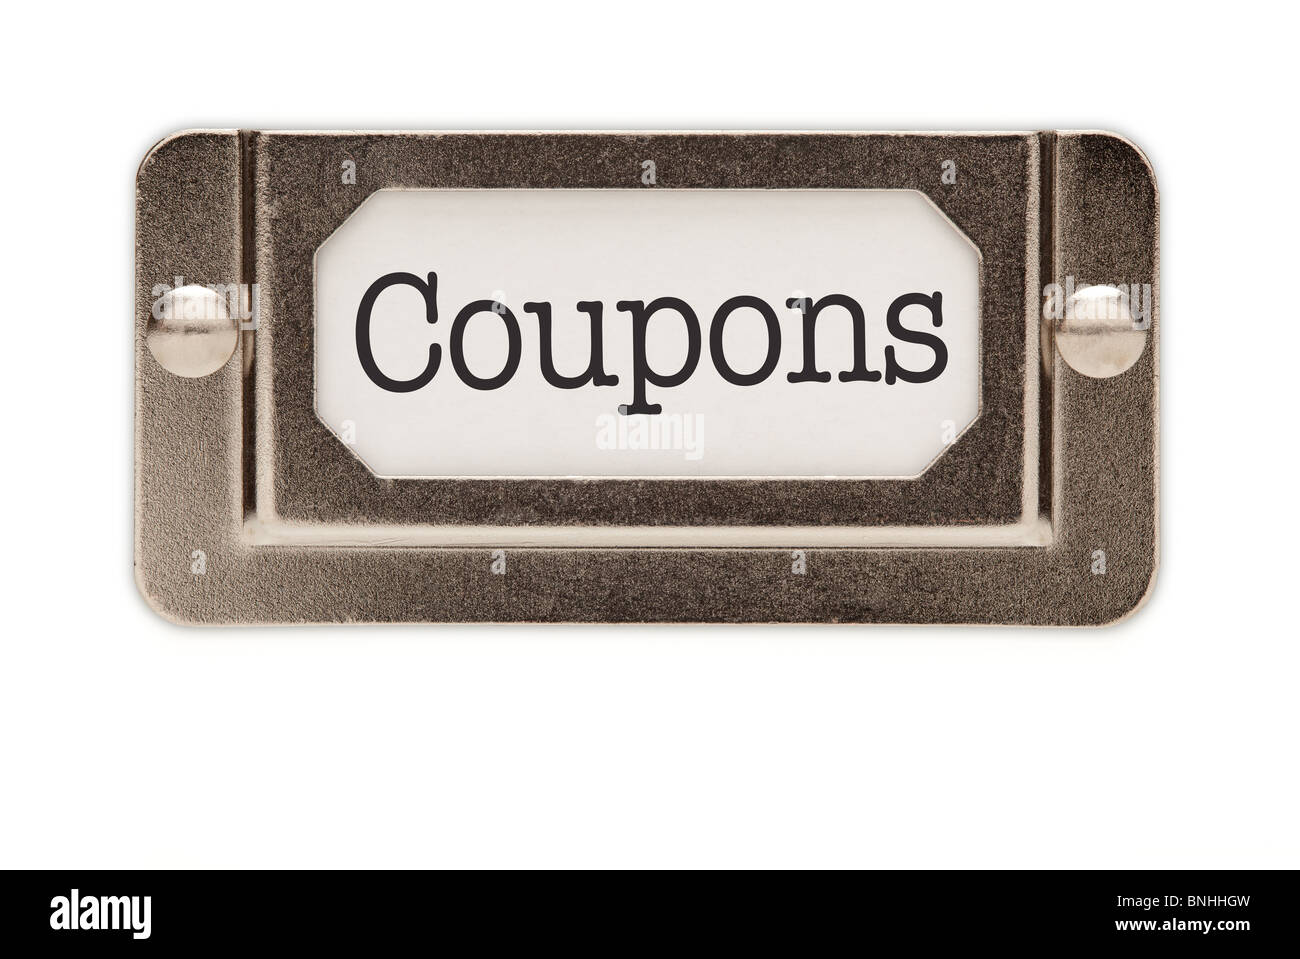 Coupons File Drawer Label Isolated on a White Background. Stock Photo